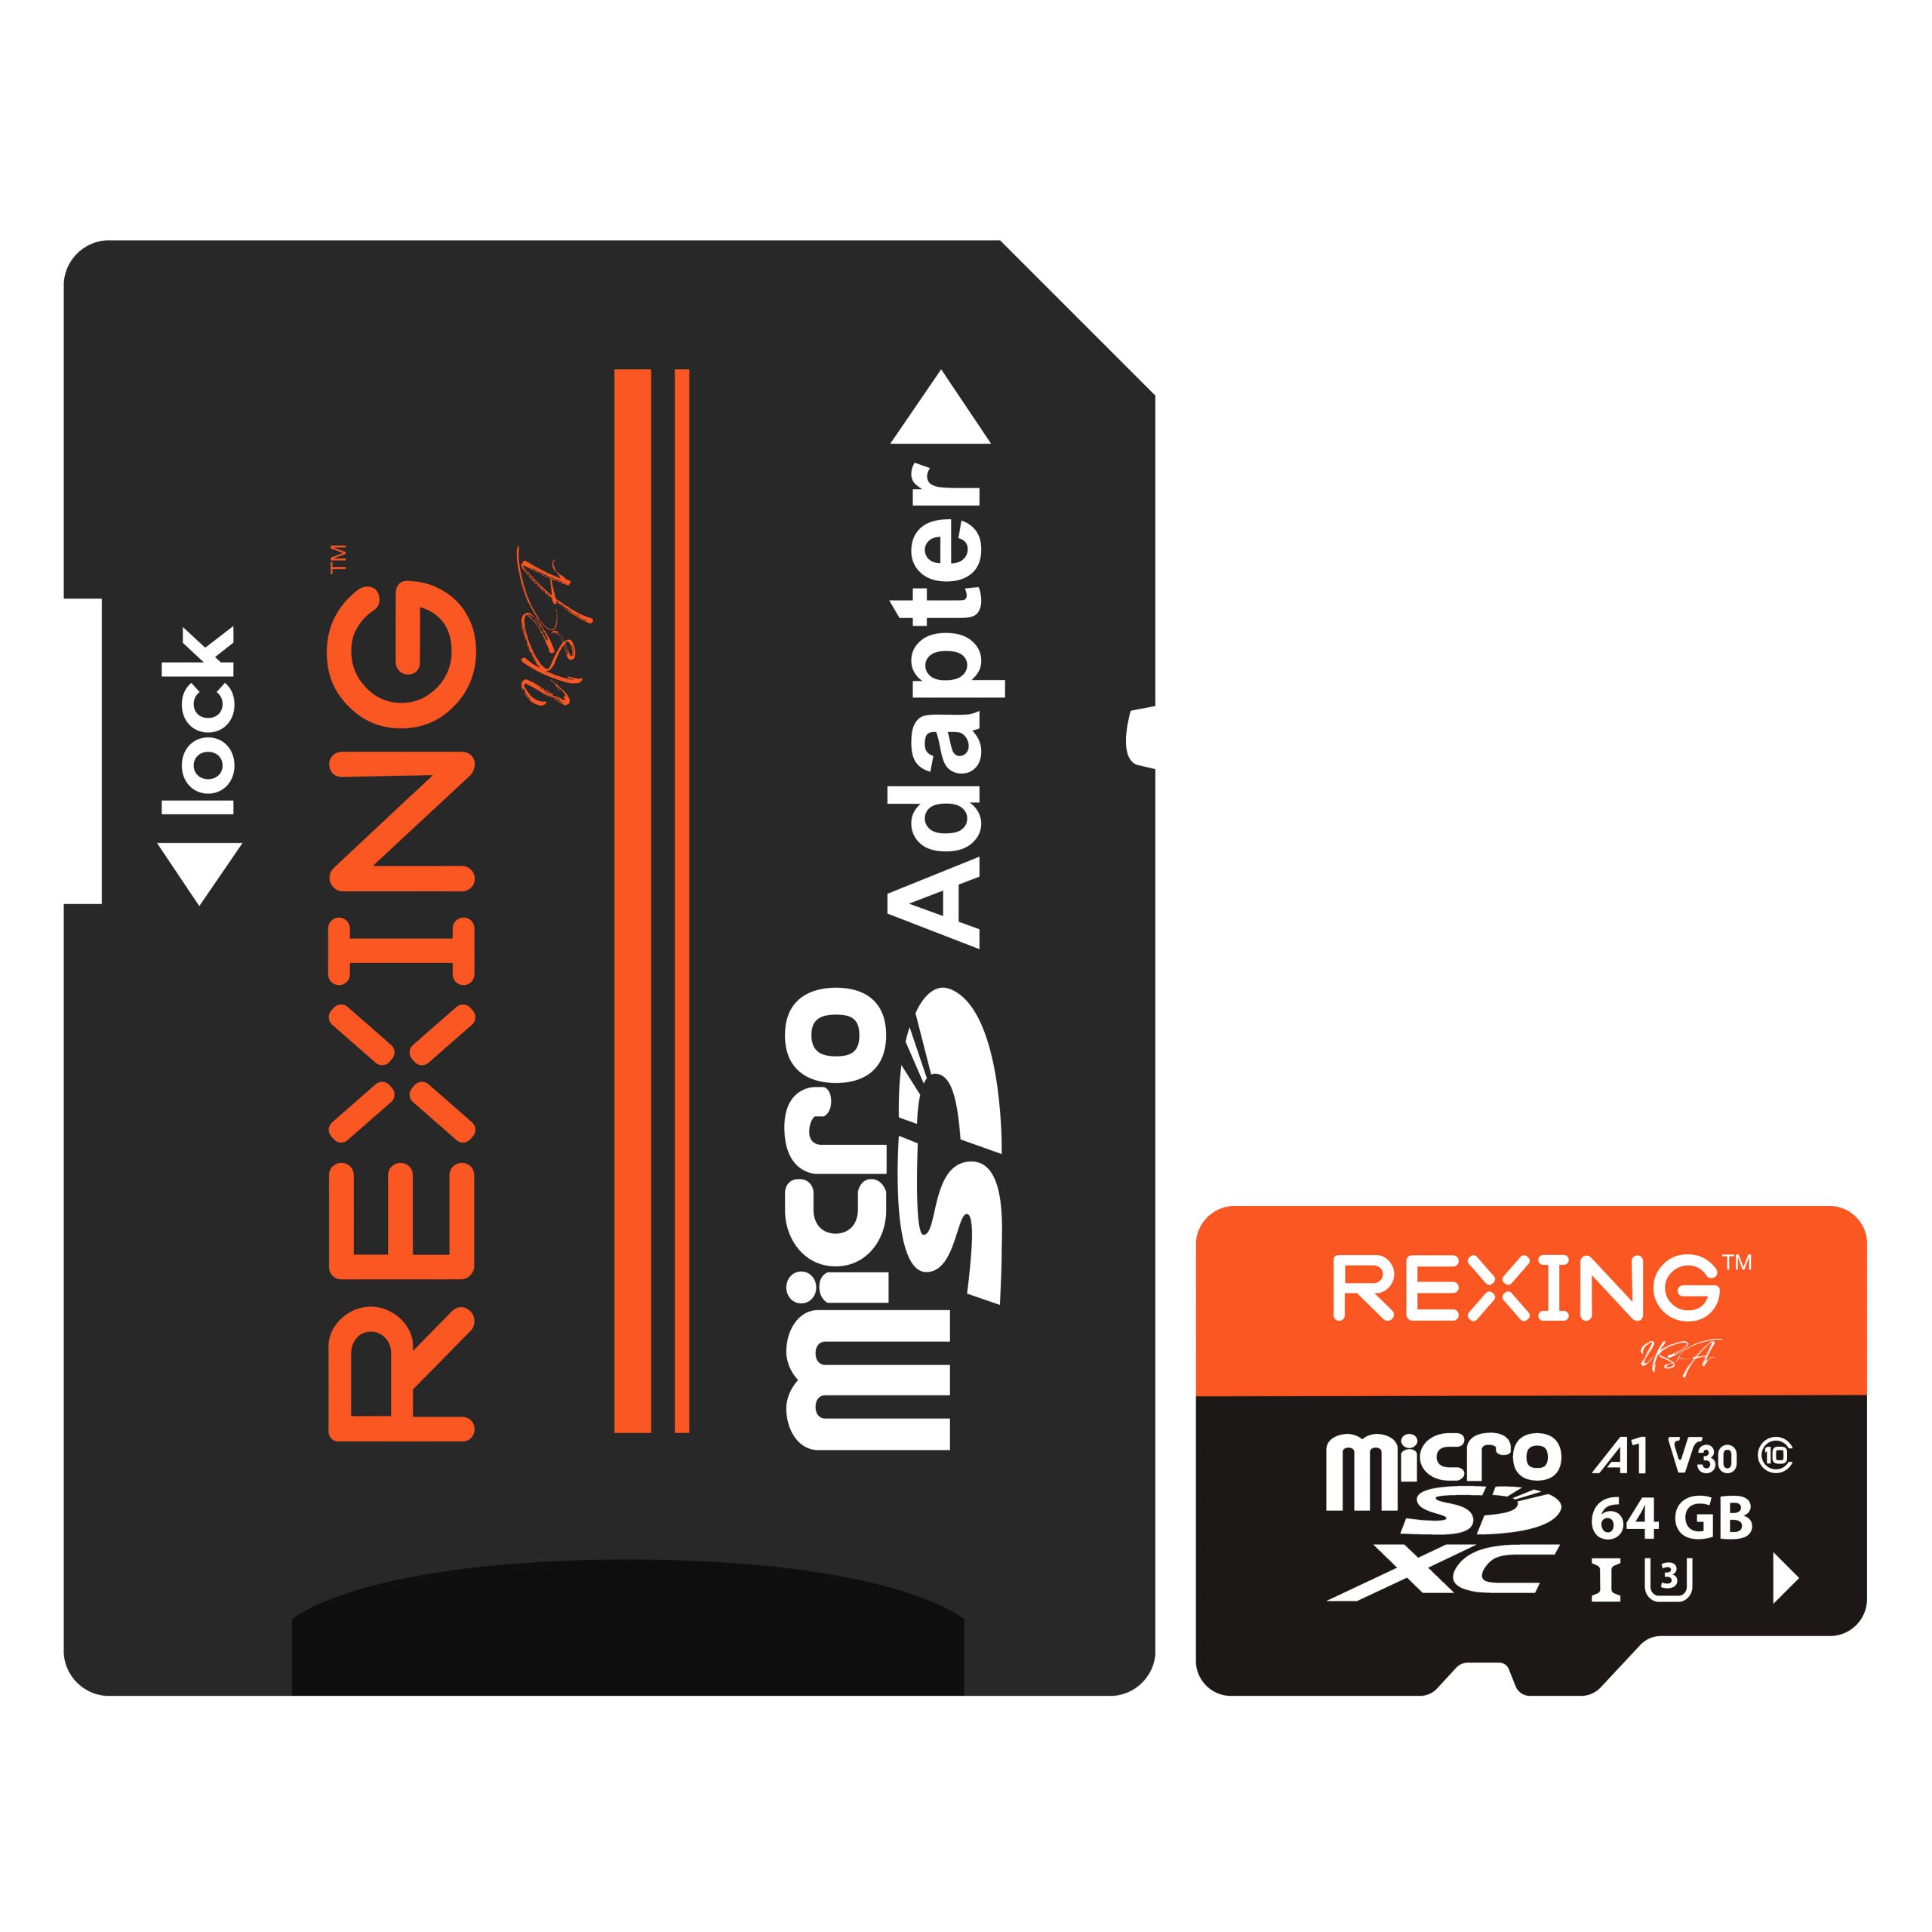 REXING microSDXC UHS-3 4K Full HD Video High Speed Transfer Monitoring SD Card with Adapter for Dash Cams, Surveillance System, Security Camera, & Bo